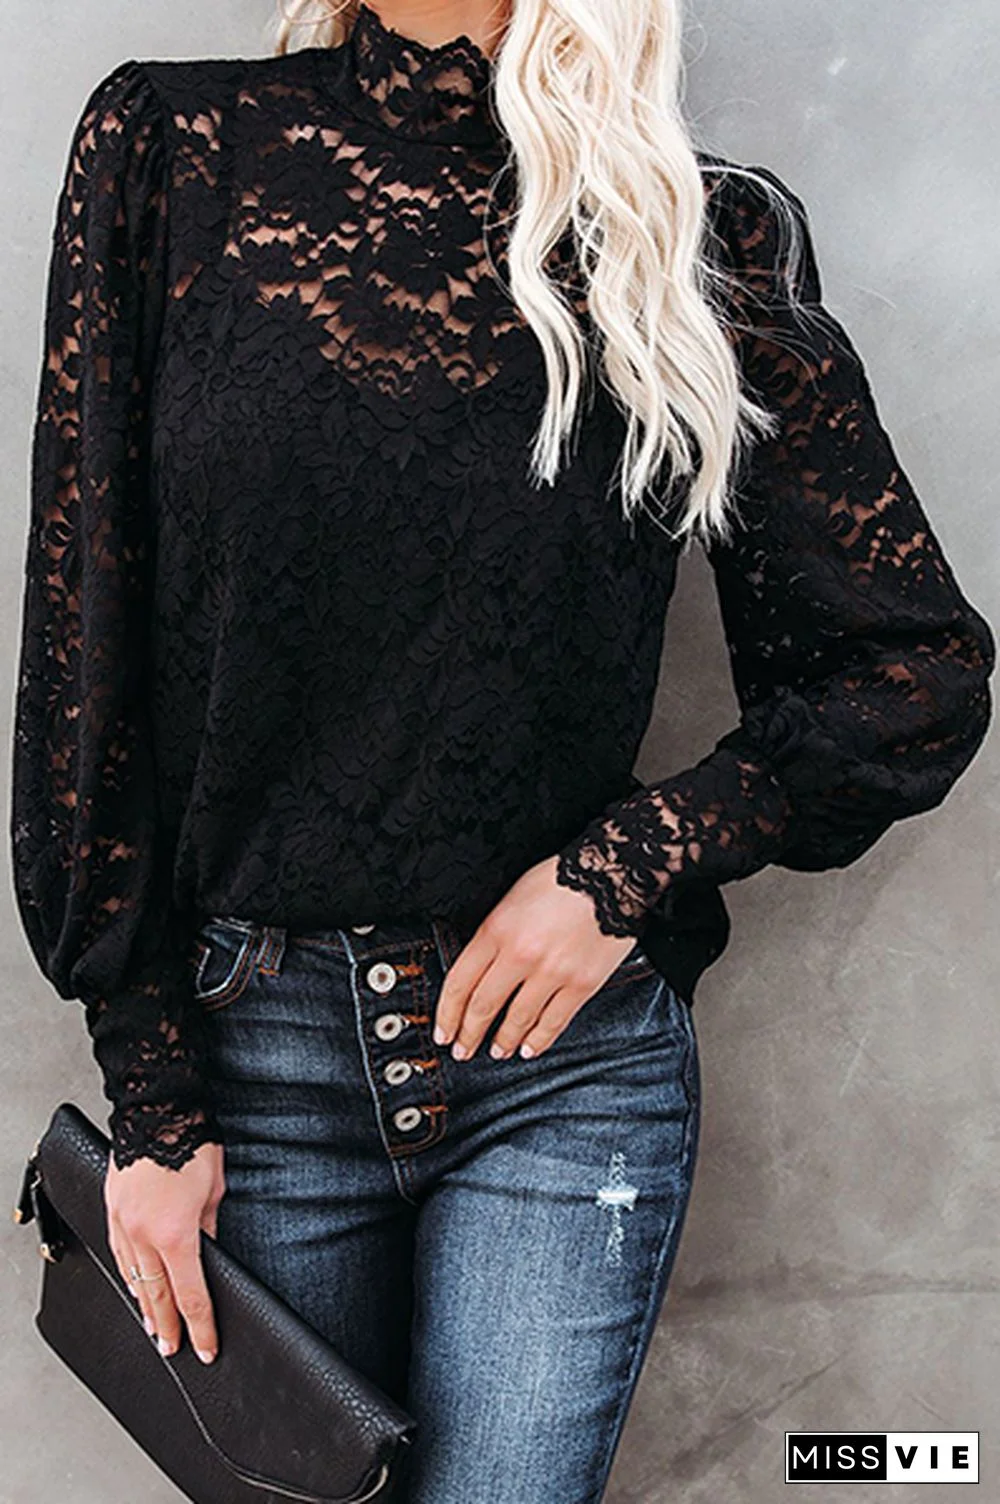 Elegant Solid Lace Hollowed Out Mandarin Collar Tops